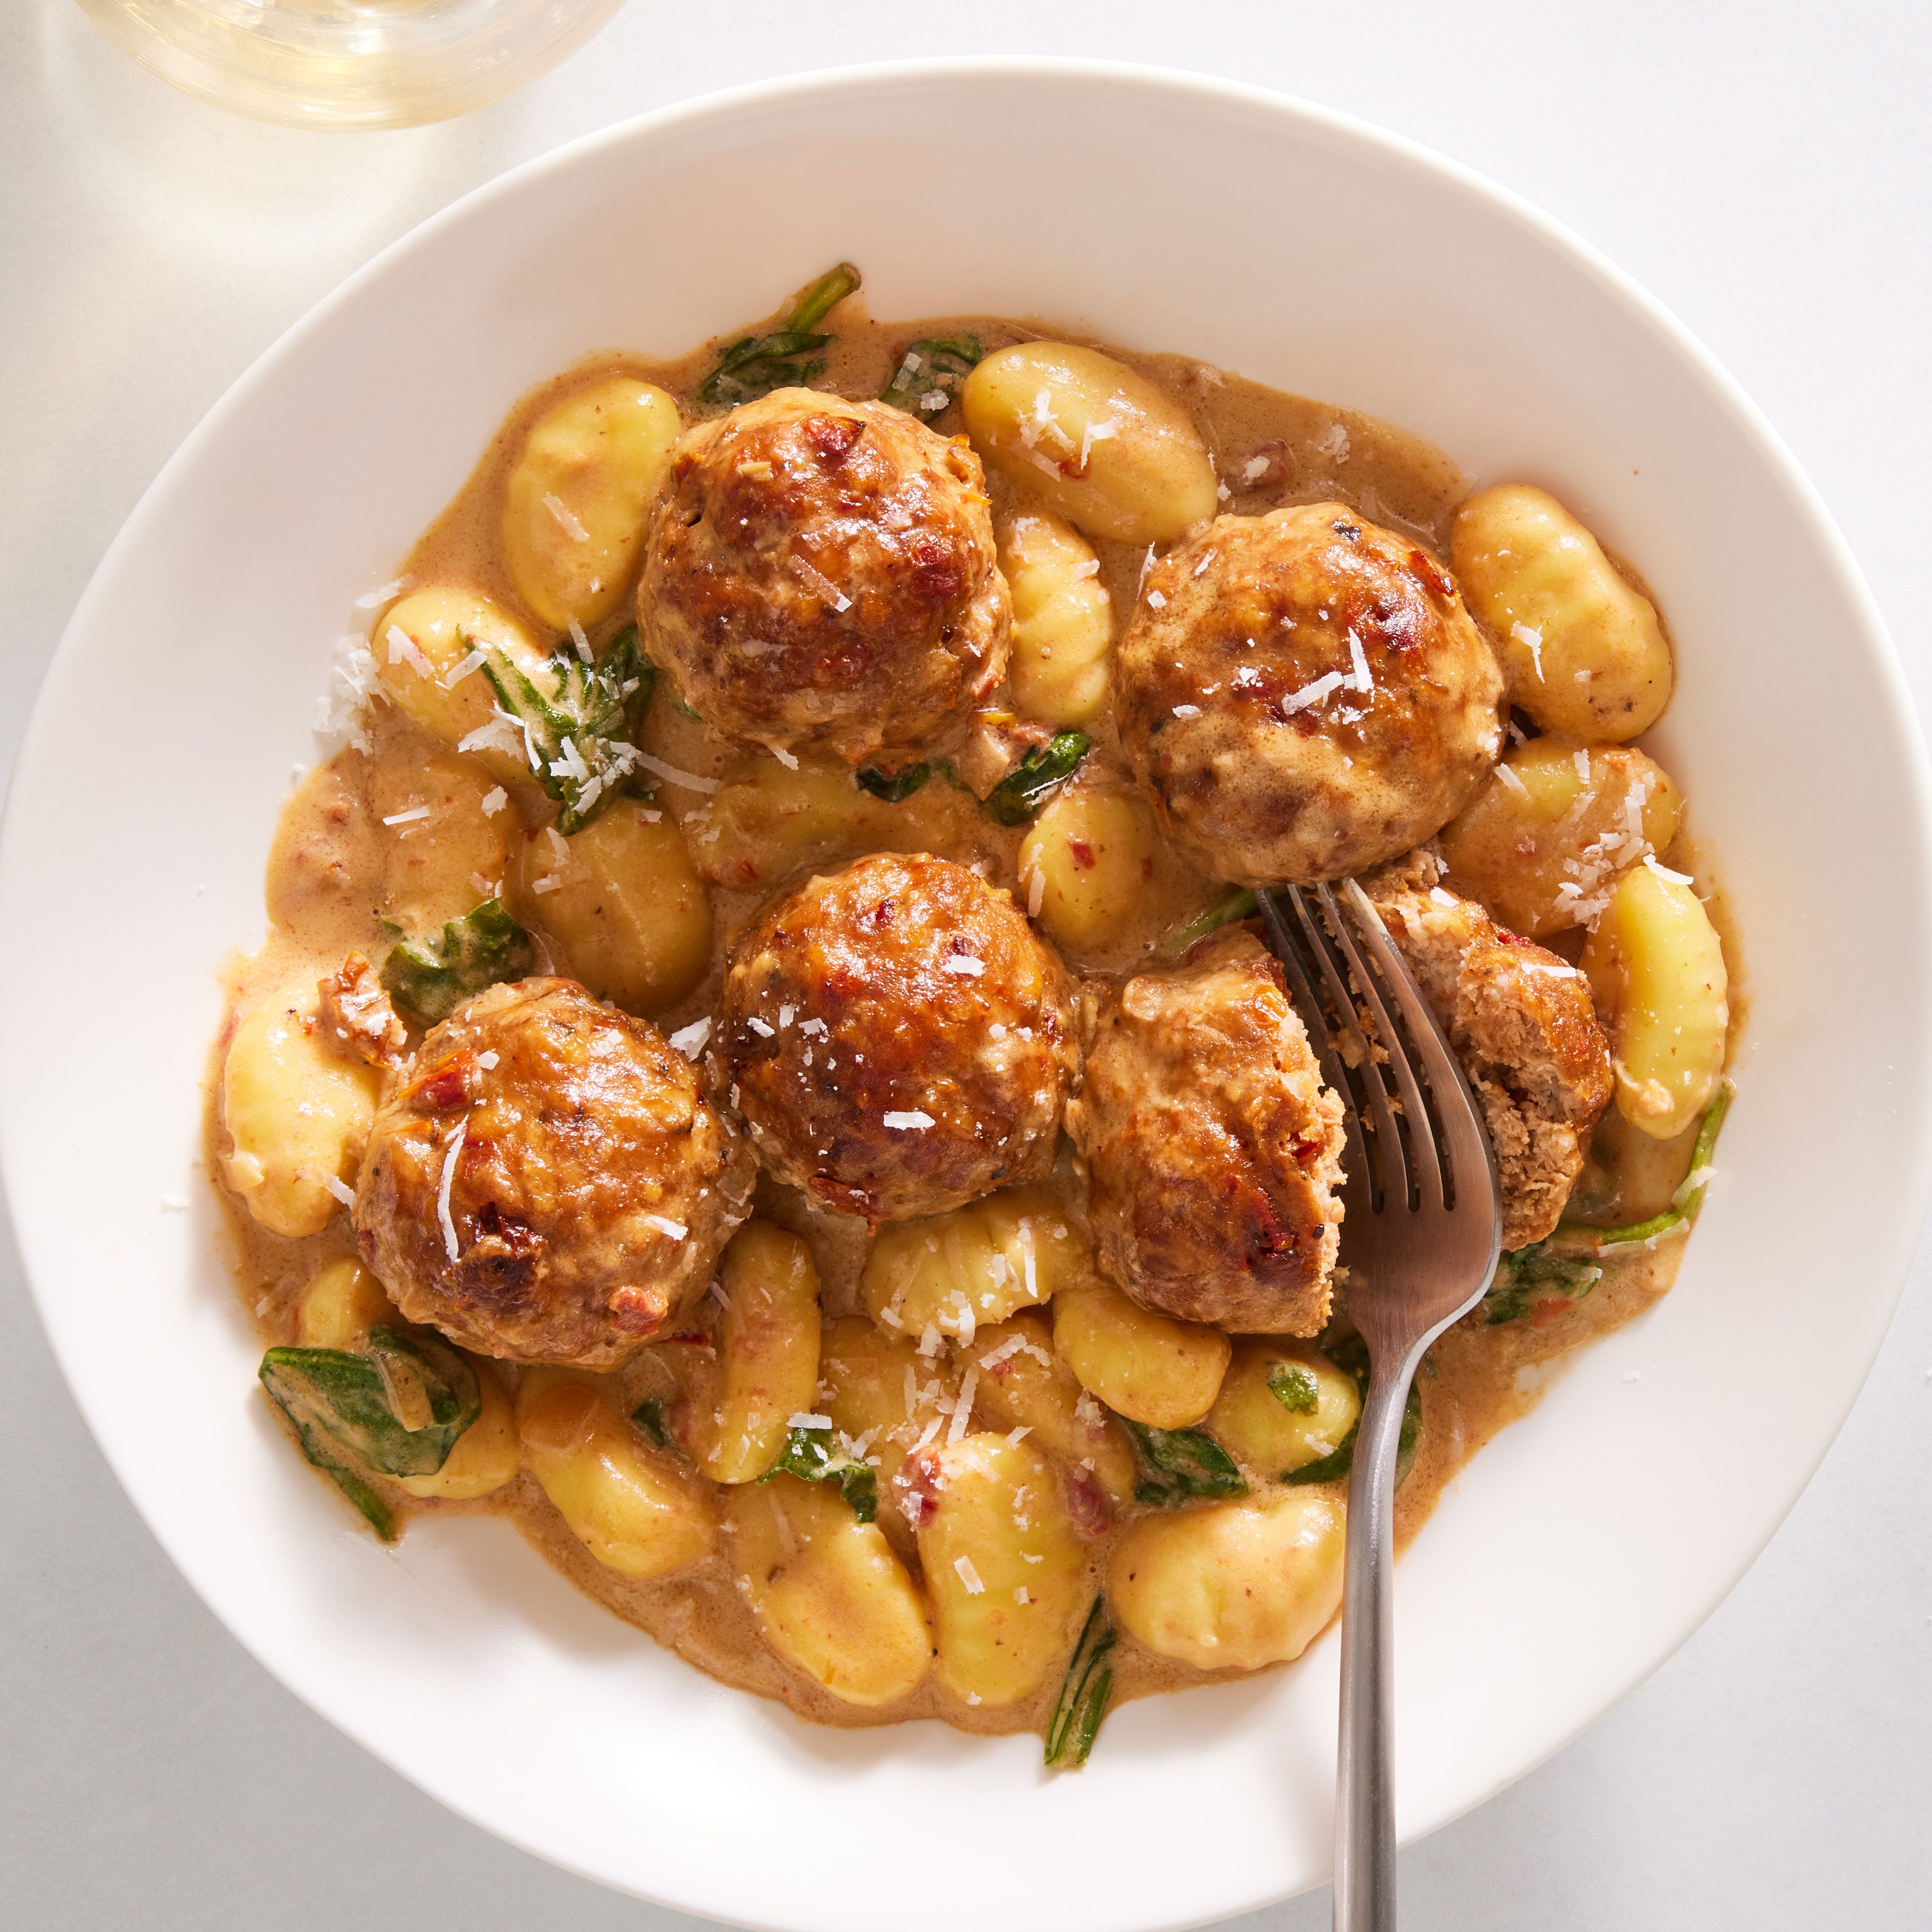 https://hips.hearstapps.com/hmg-prod/images/slow-cooker-tuscan-chicken-meatballs-with-gnocchi-secondary-64665b26ed479.jpg